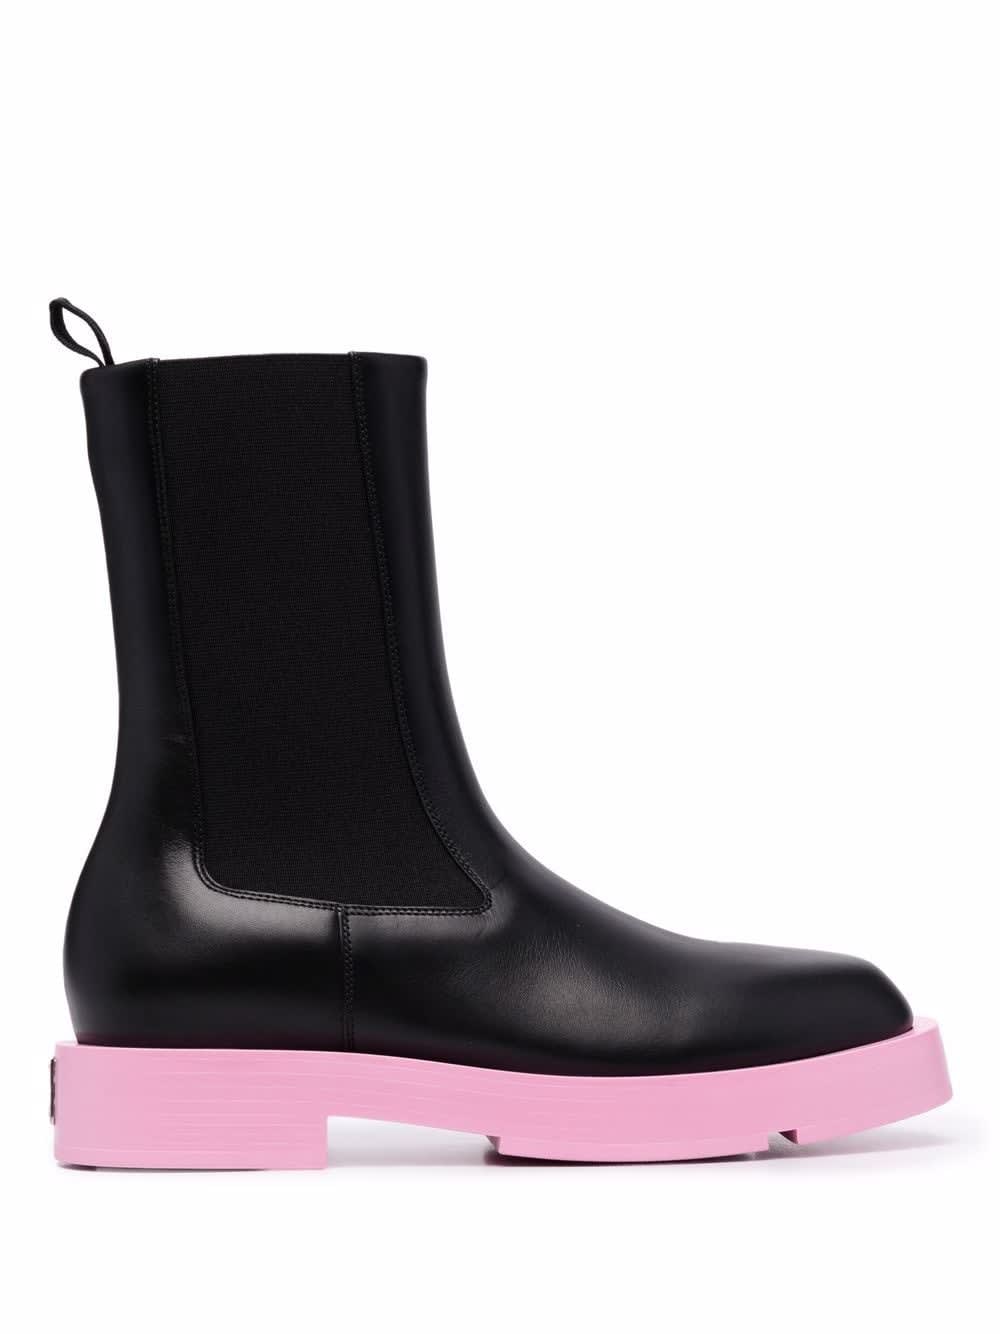 Givenchy Woman Black And Pink Chelsea Ankle Boot